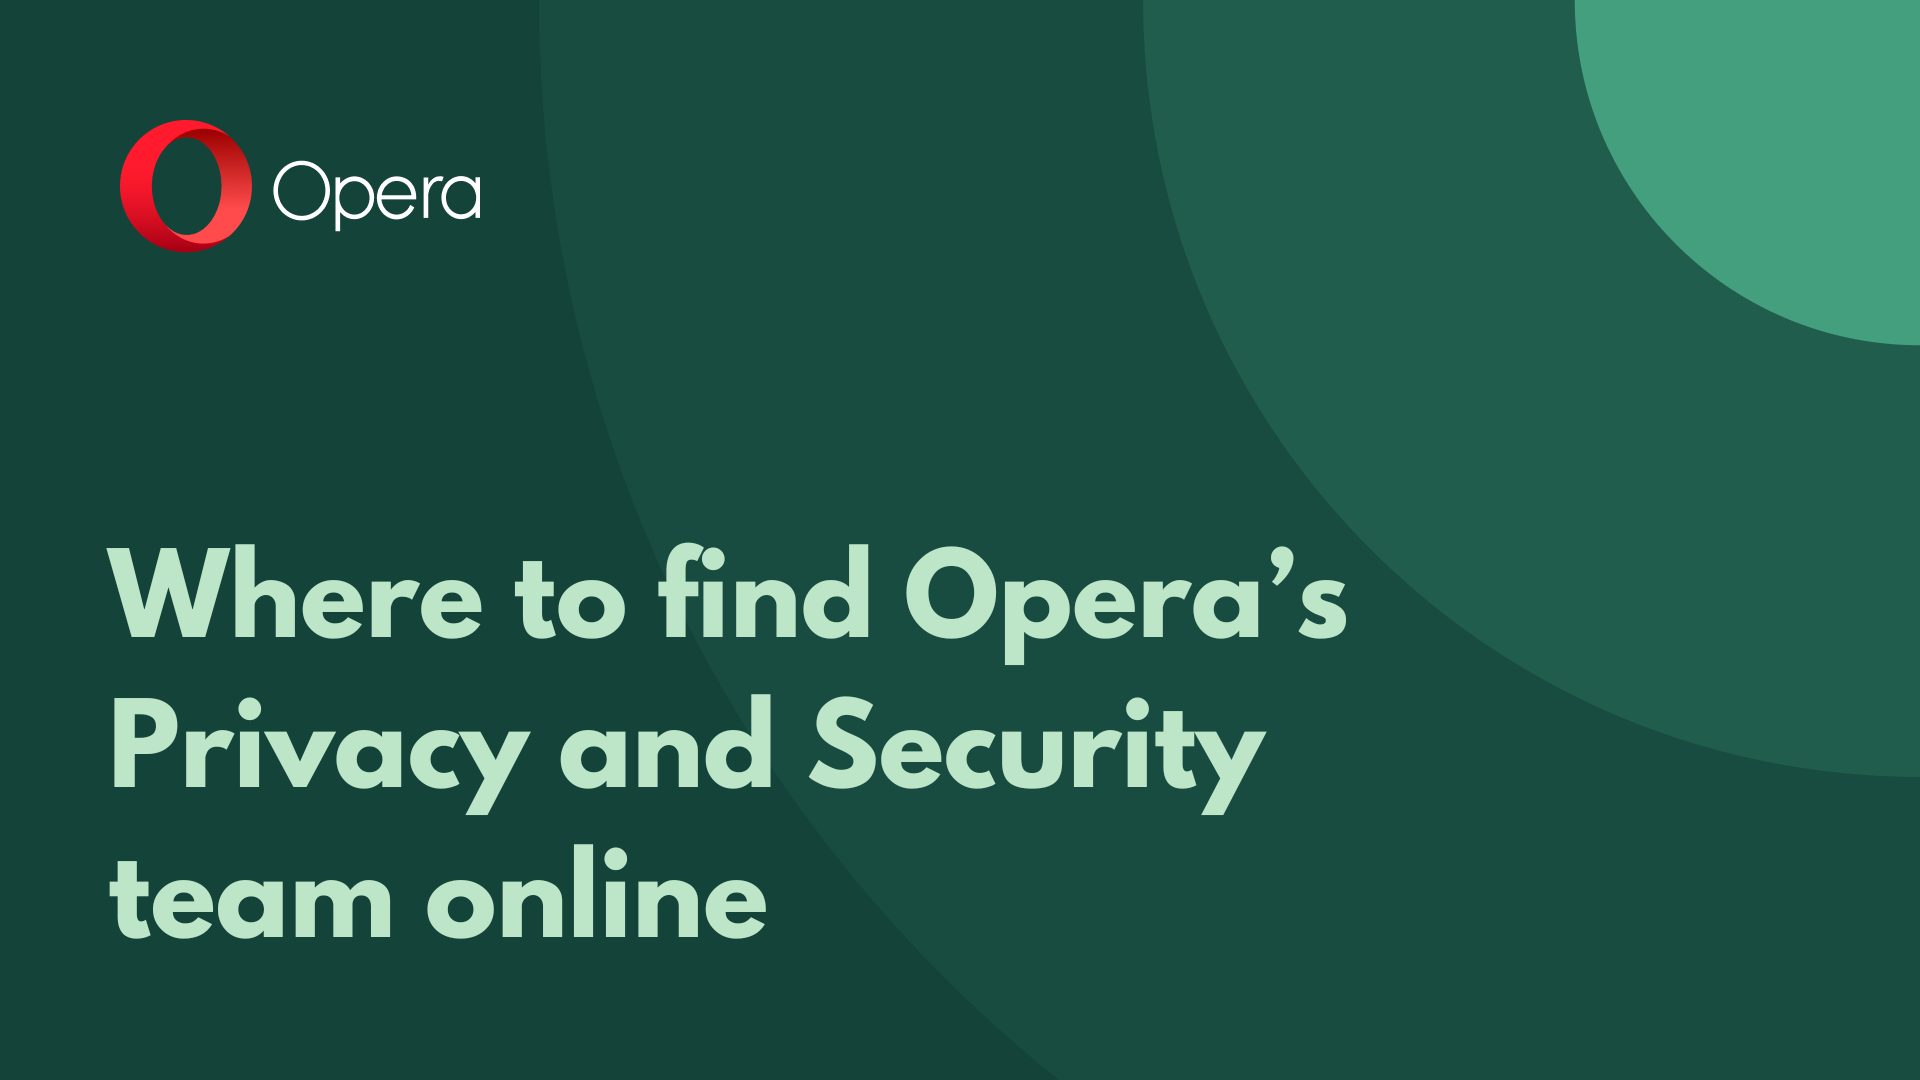 Where to find Opera's privacy and security team online